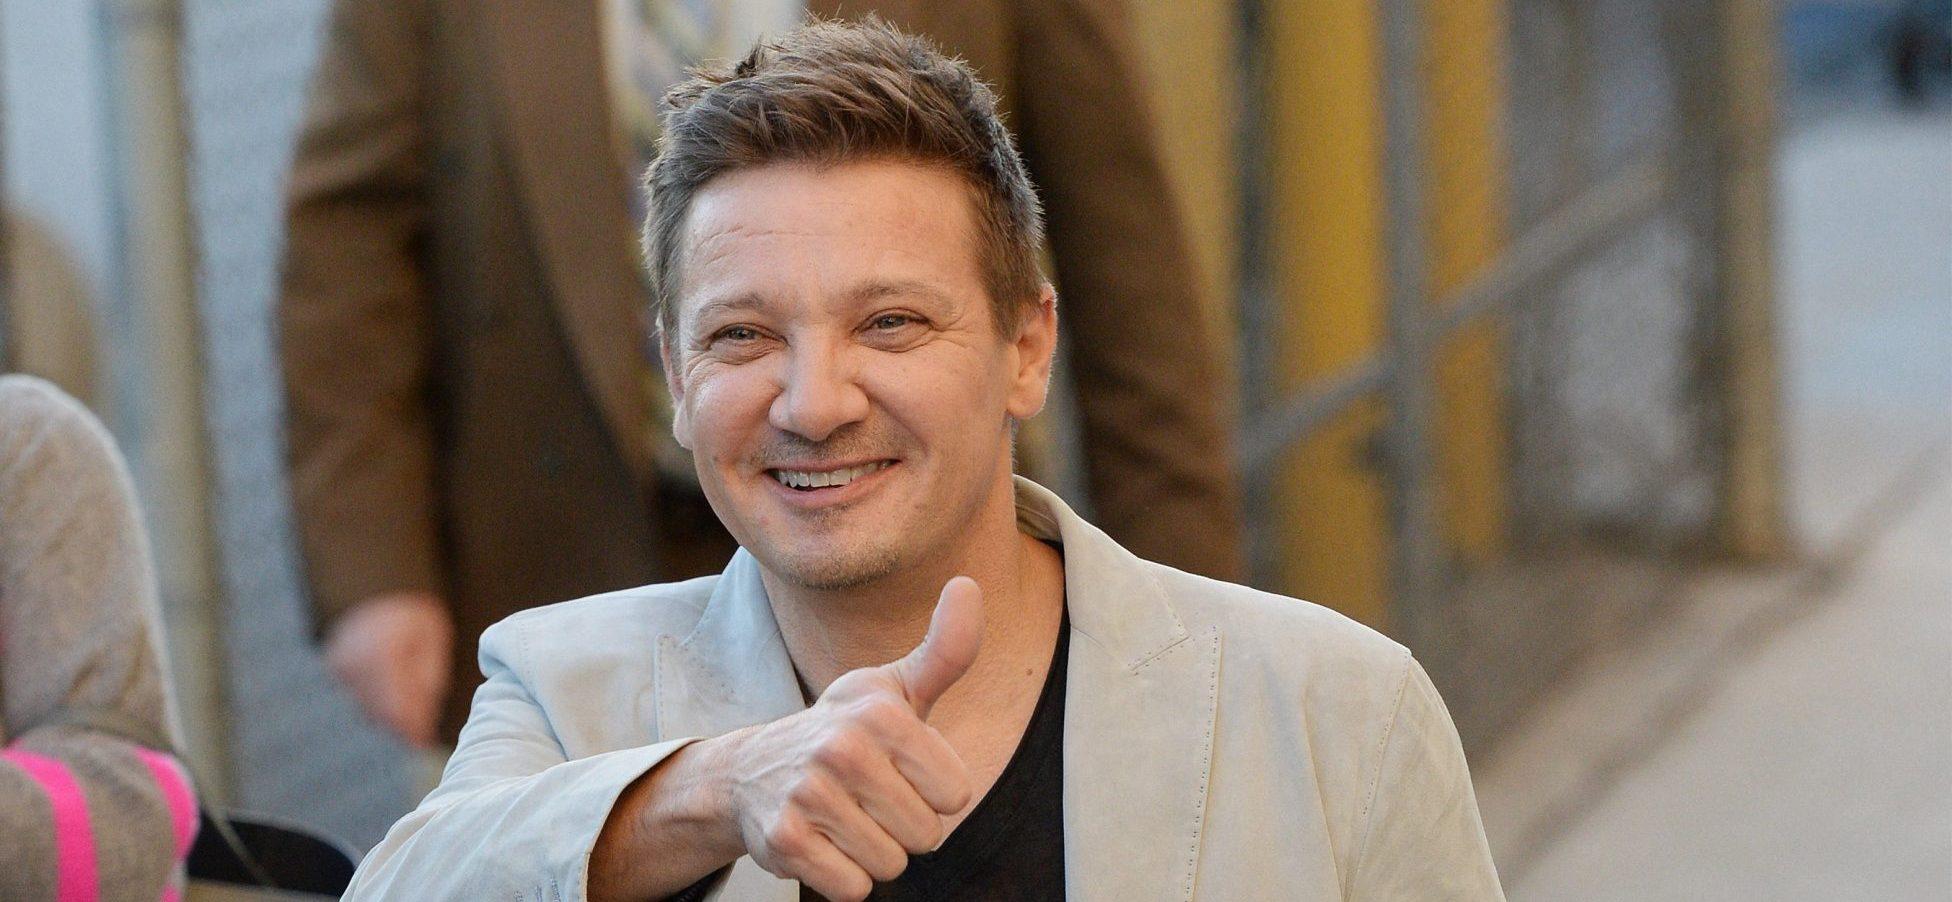 Jeremy Renner Looks Radiant And Happy In New Selfie Amid Recovery After Snow Plow Accident